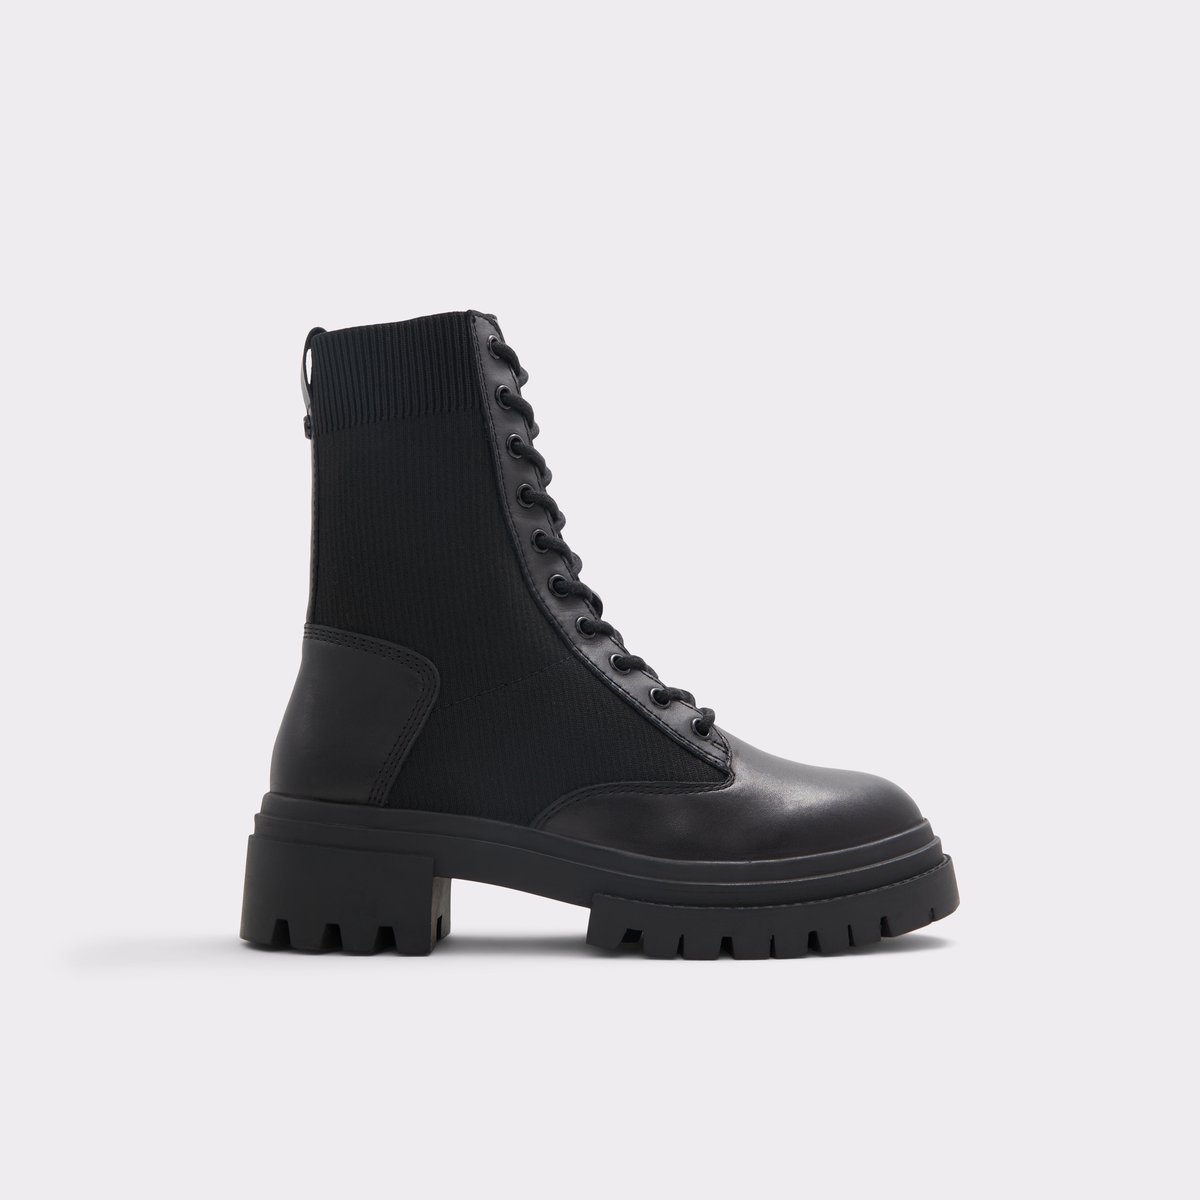 Reflow Black Leather Mixed Material Women's Combat boots | ALDO Canada